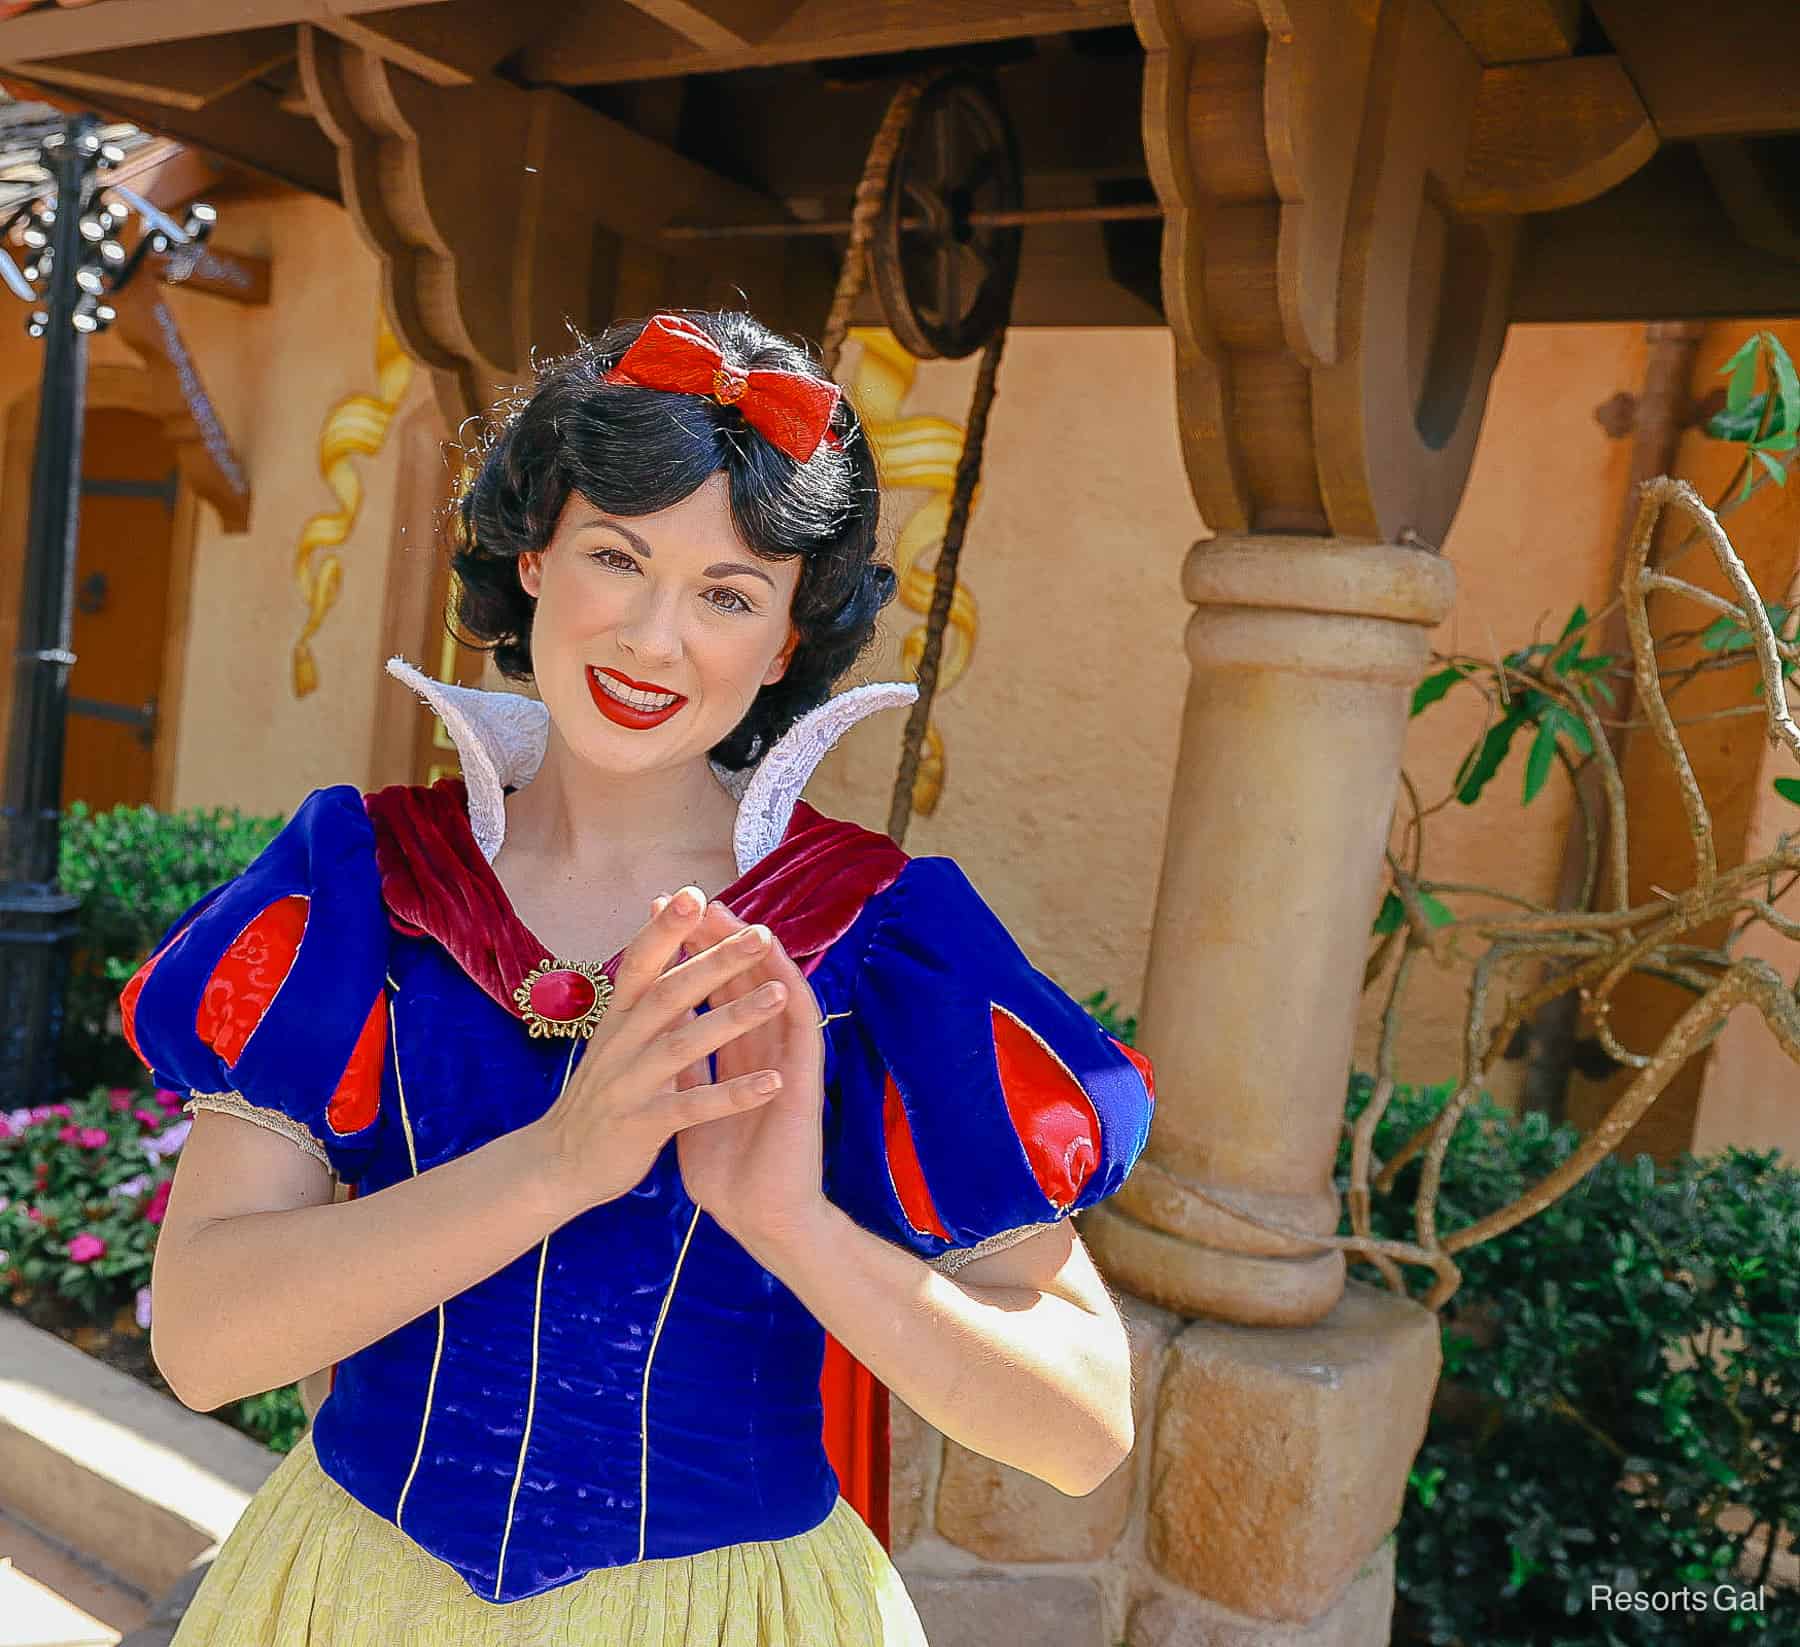 Snow White at her wishing well. 